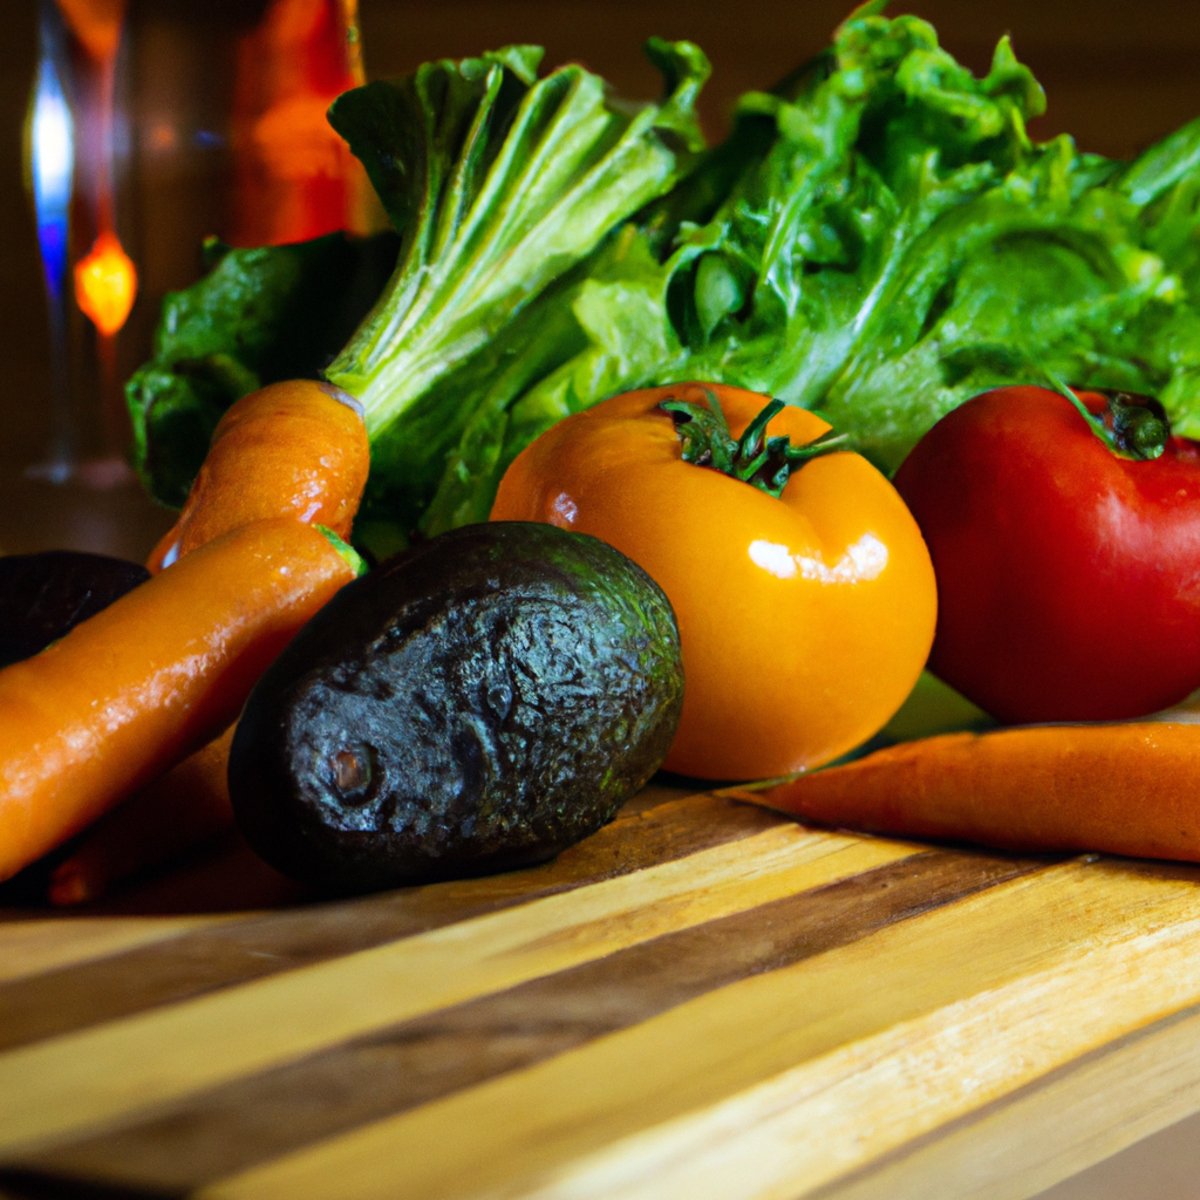 The photo features a wooden cutting board with an array of colorful fruits and vegetables arranged in an artful display. A ripe avocado, juicy red tomatoes, crisp green lettuce, and vibrant orange carrots are just a few of the organic foods showcased. The natural textures and colors of the produce are highlighted by the soft lighting, making the viewer's mouth water in anticipation of a healthy meal.